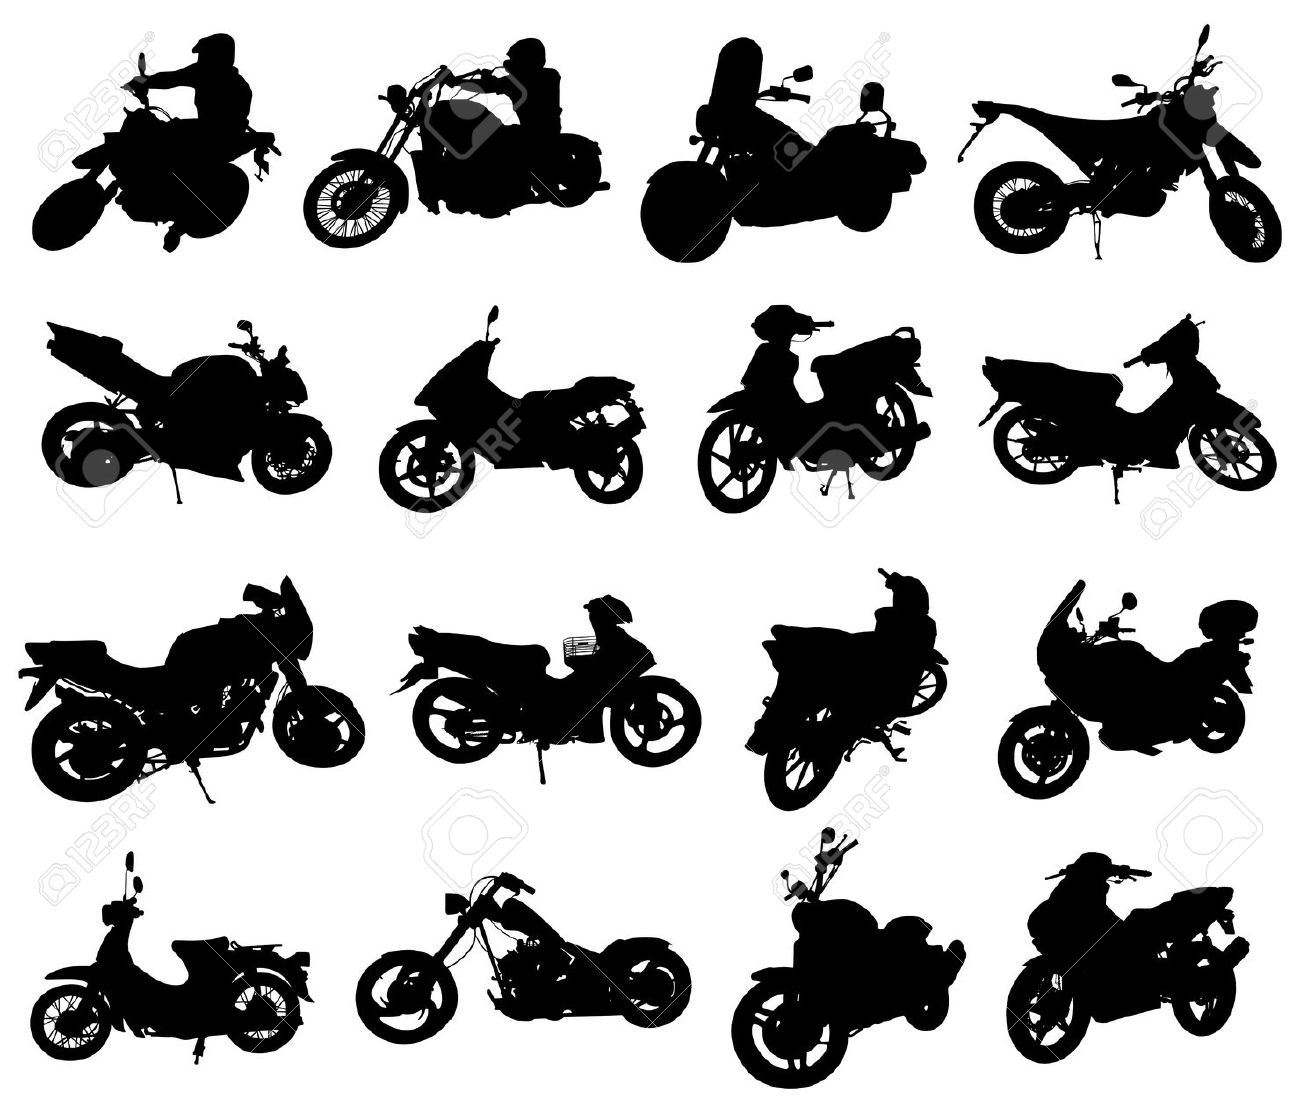 Free vector clipart silhouette motorcycle 